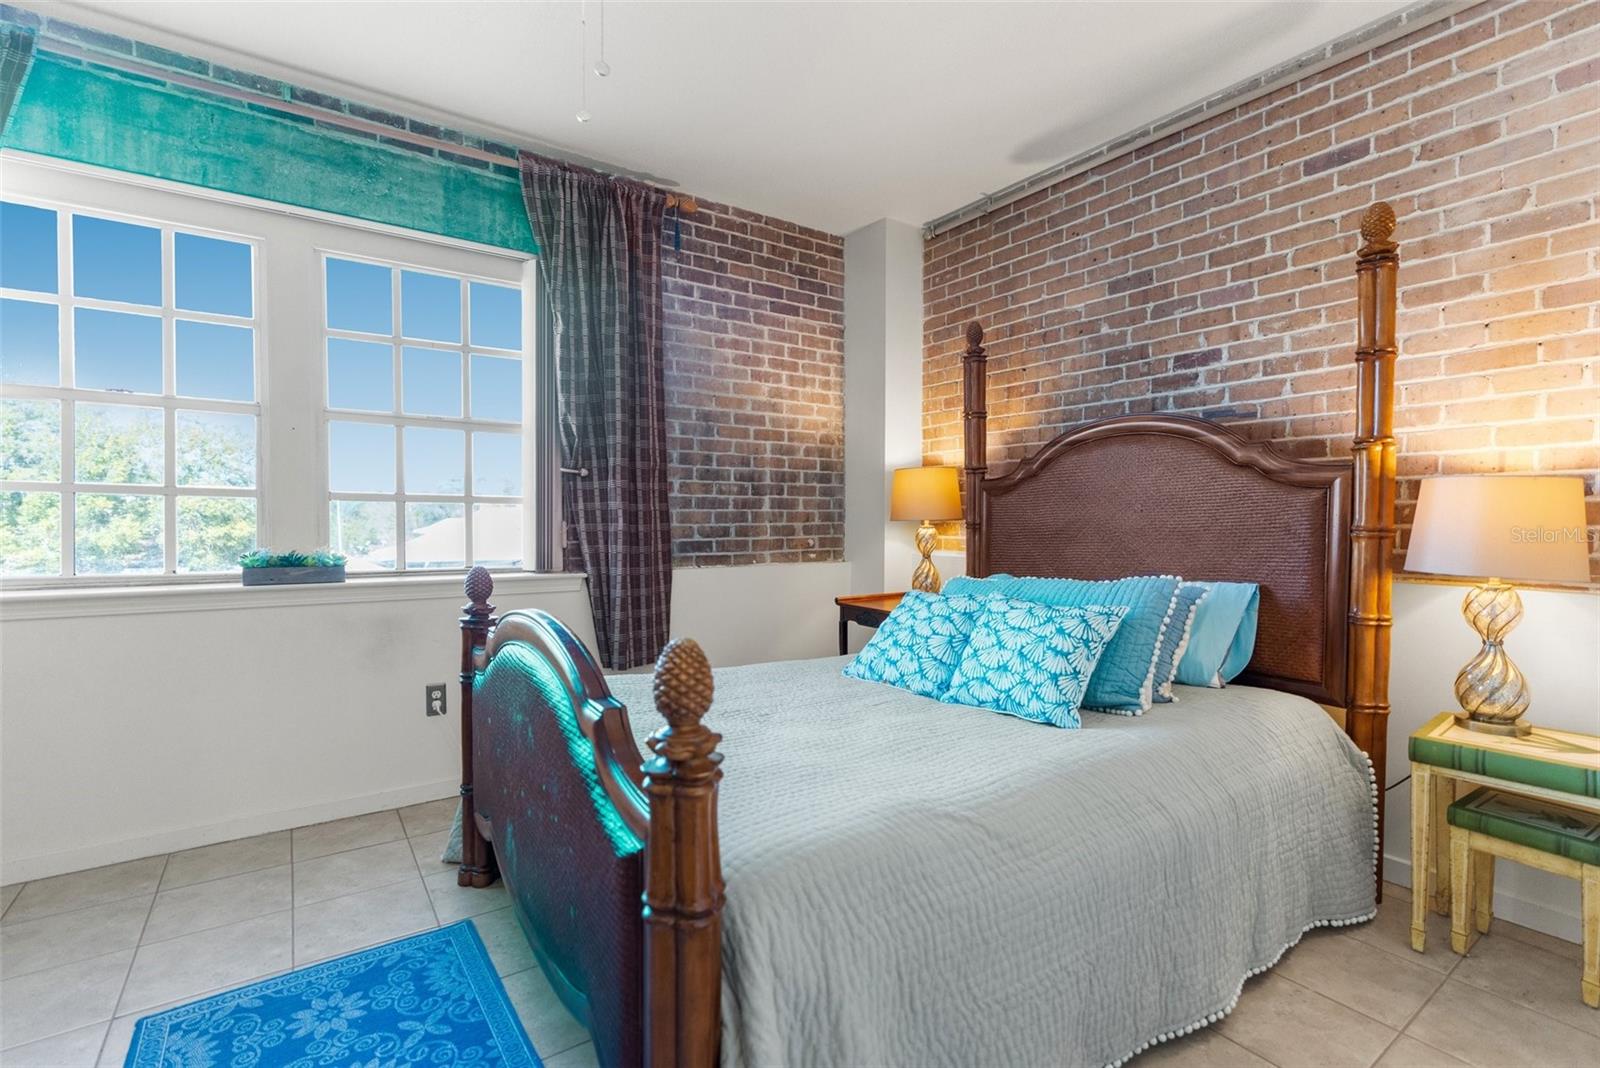 The Bedroom has Gorgeous Brick on TWO Walls !! WOW